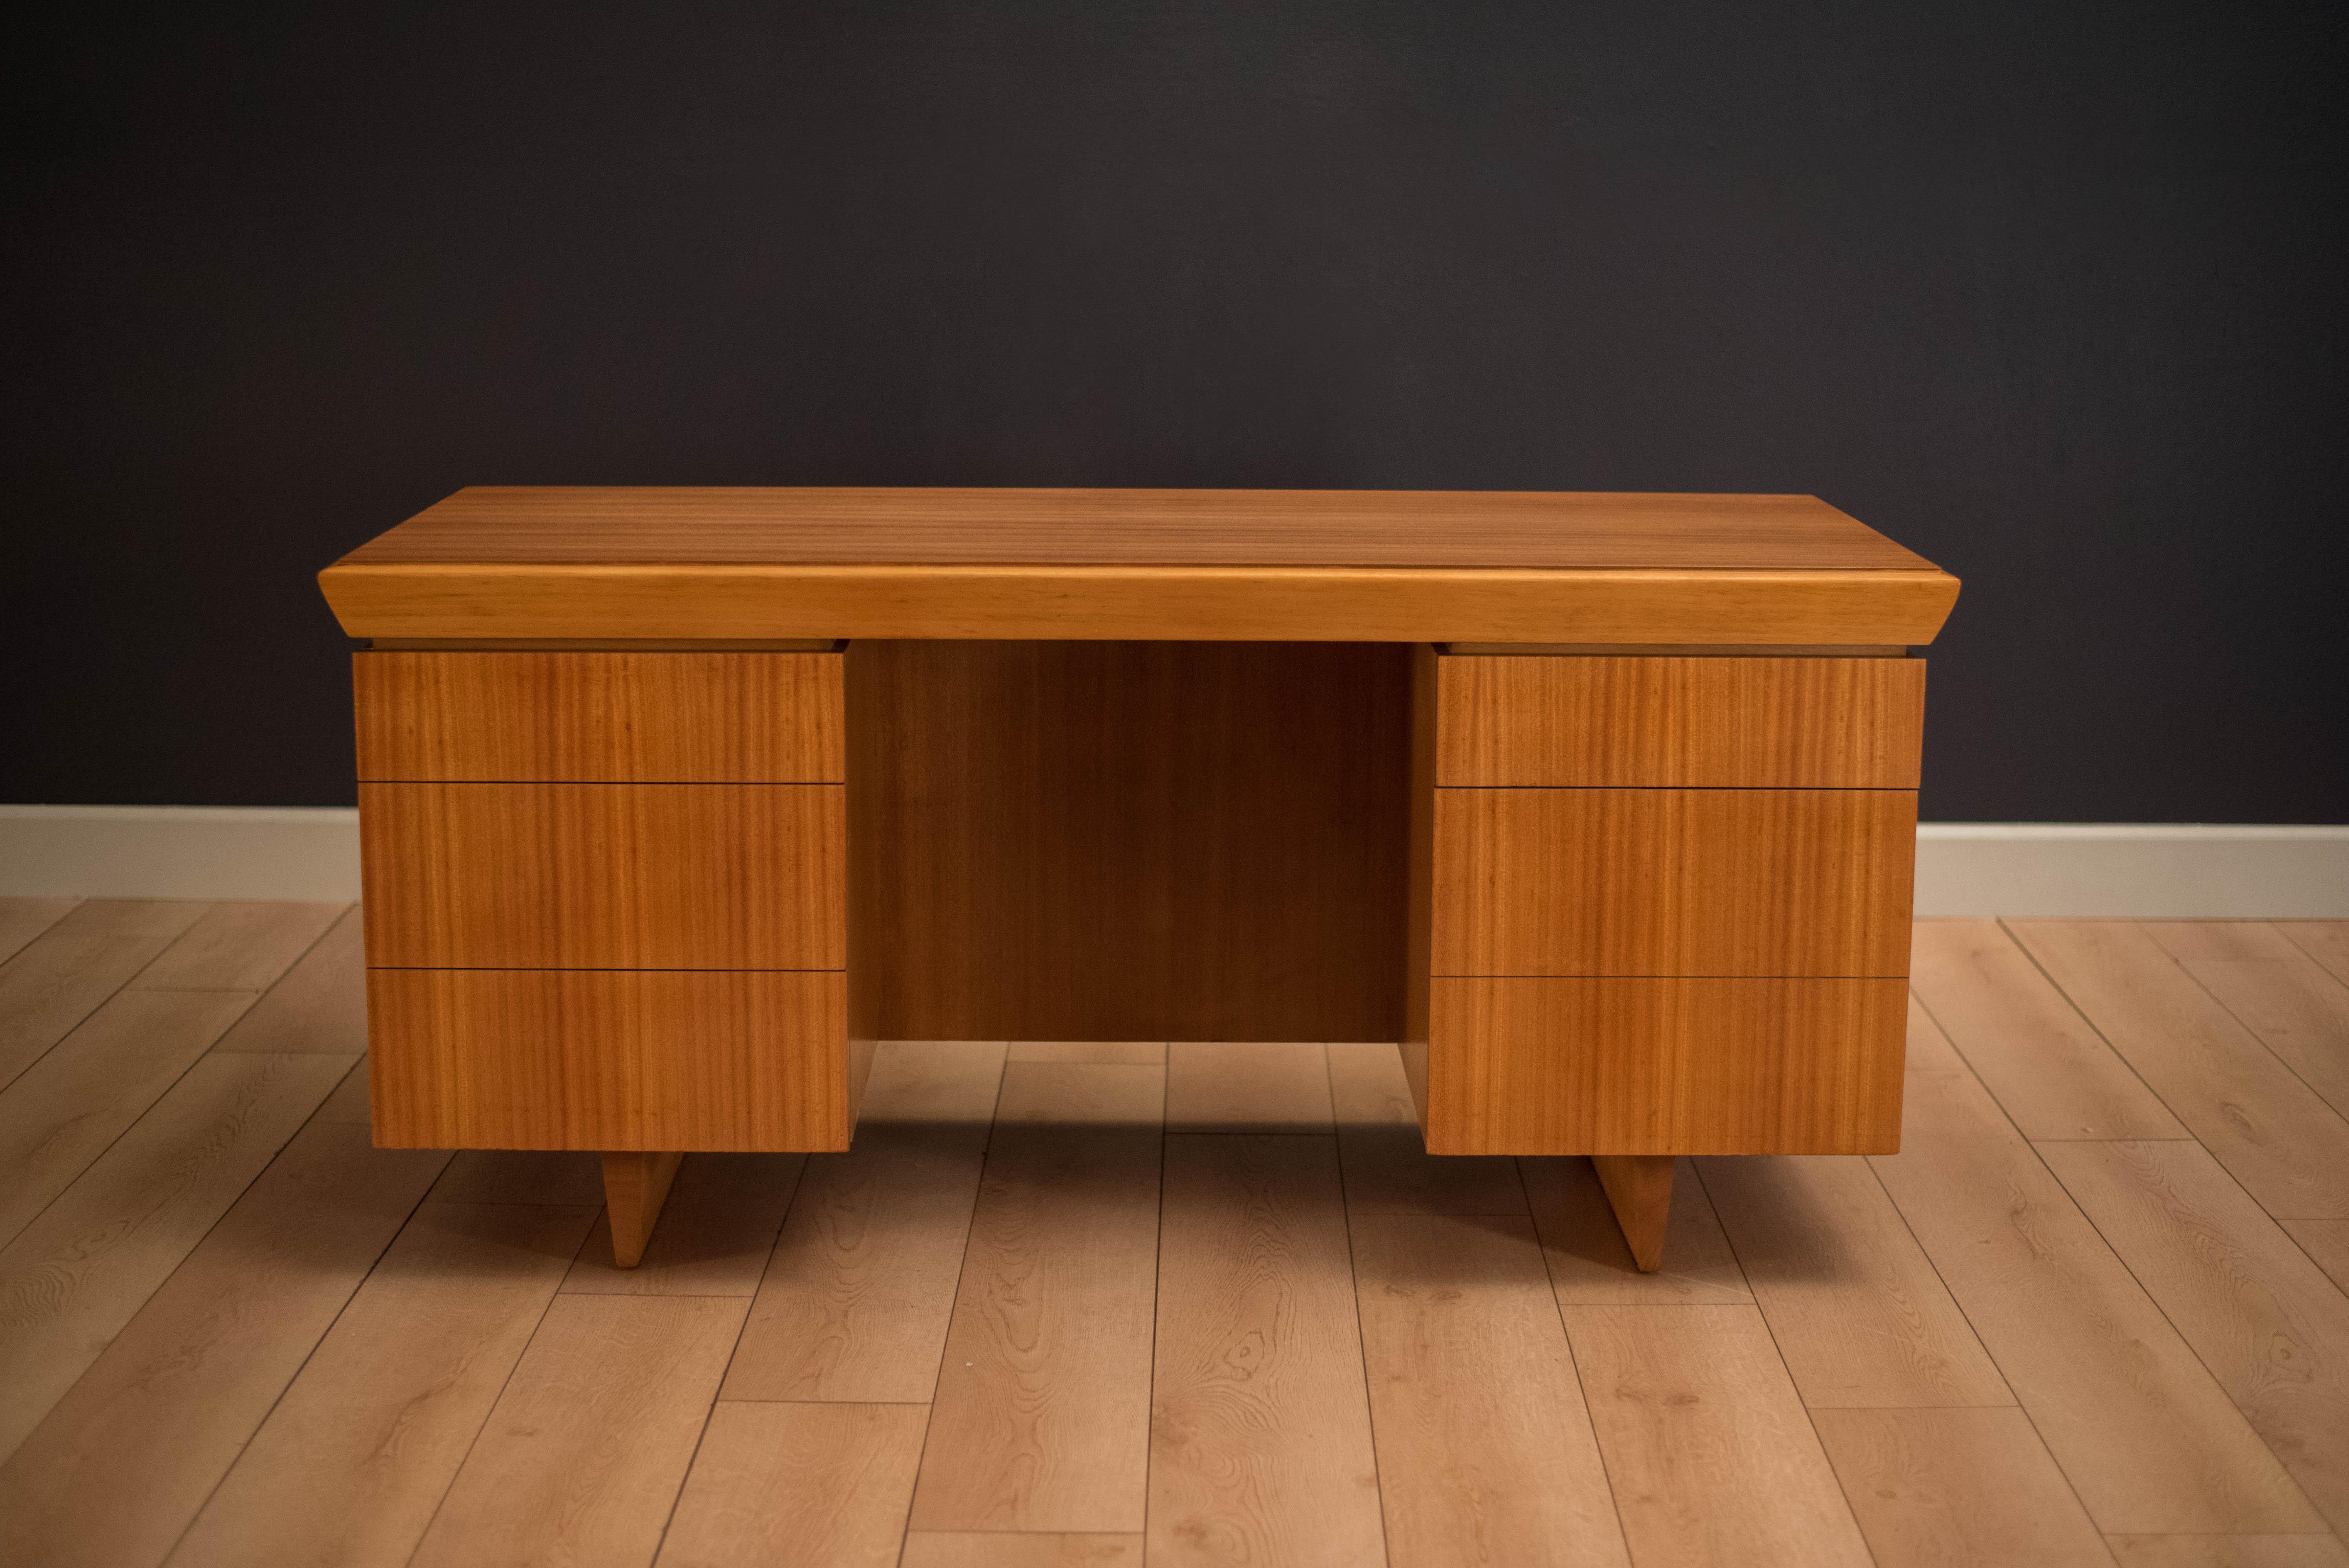 Mid-Century Modern desk designed by Paul Laszlo for Brown Saltman in mahogany. This piece can be displayed from any angle and includes a finished backside with a bookshelf display. Equipped with four storage drawers and one filing drawer.